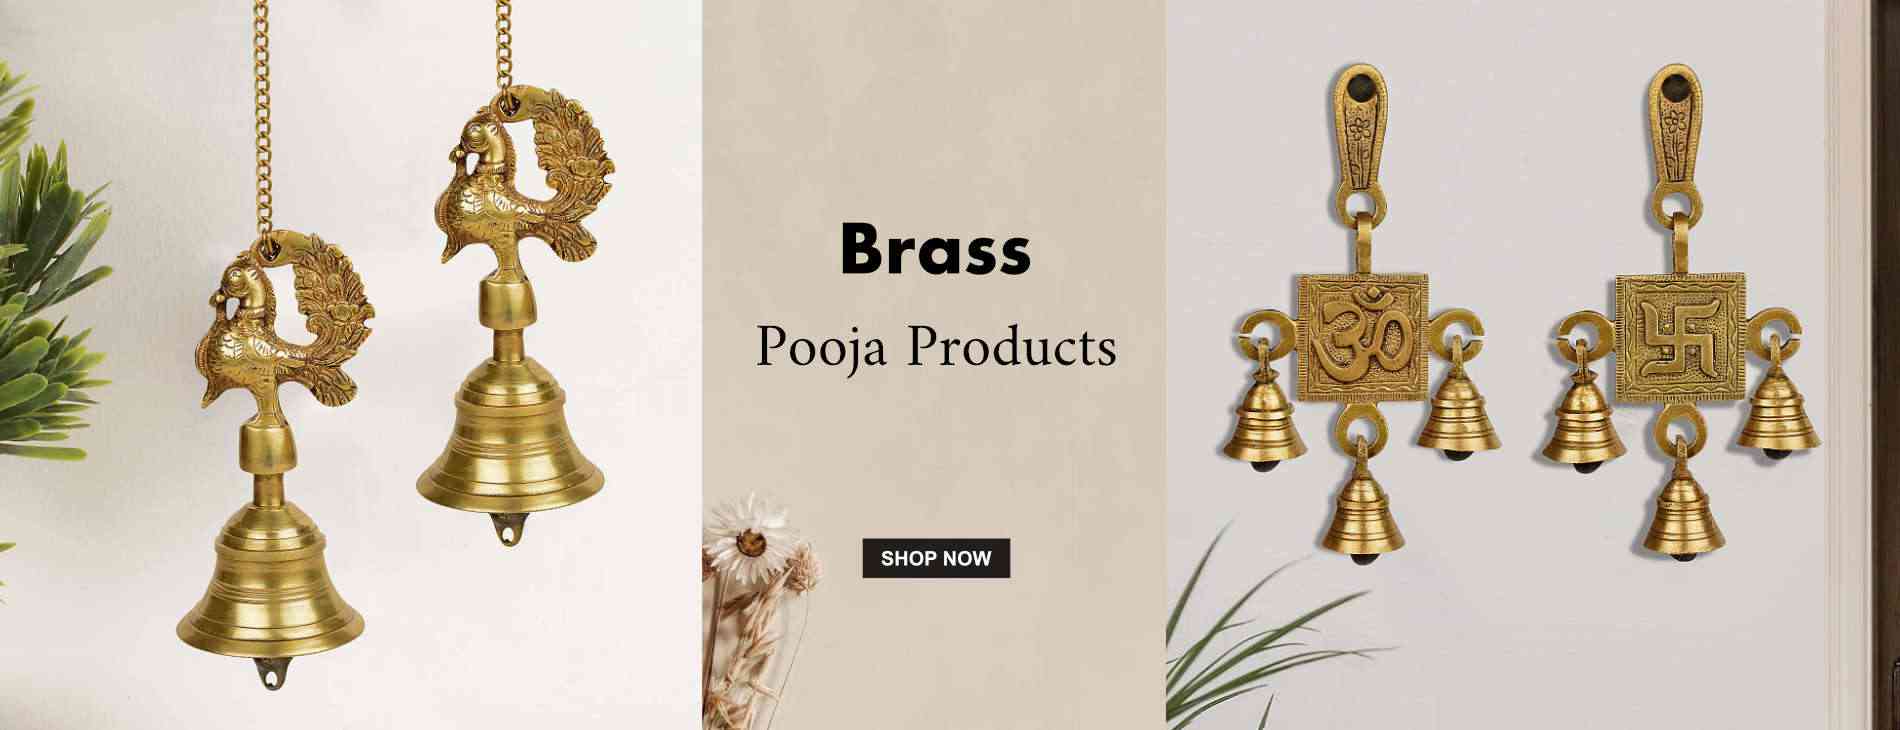 https://www.stylemyway.com/decor/pooja-articles